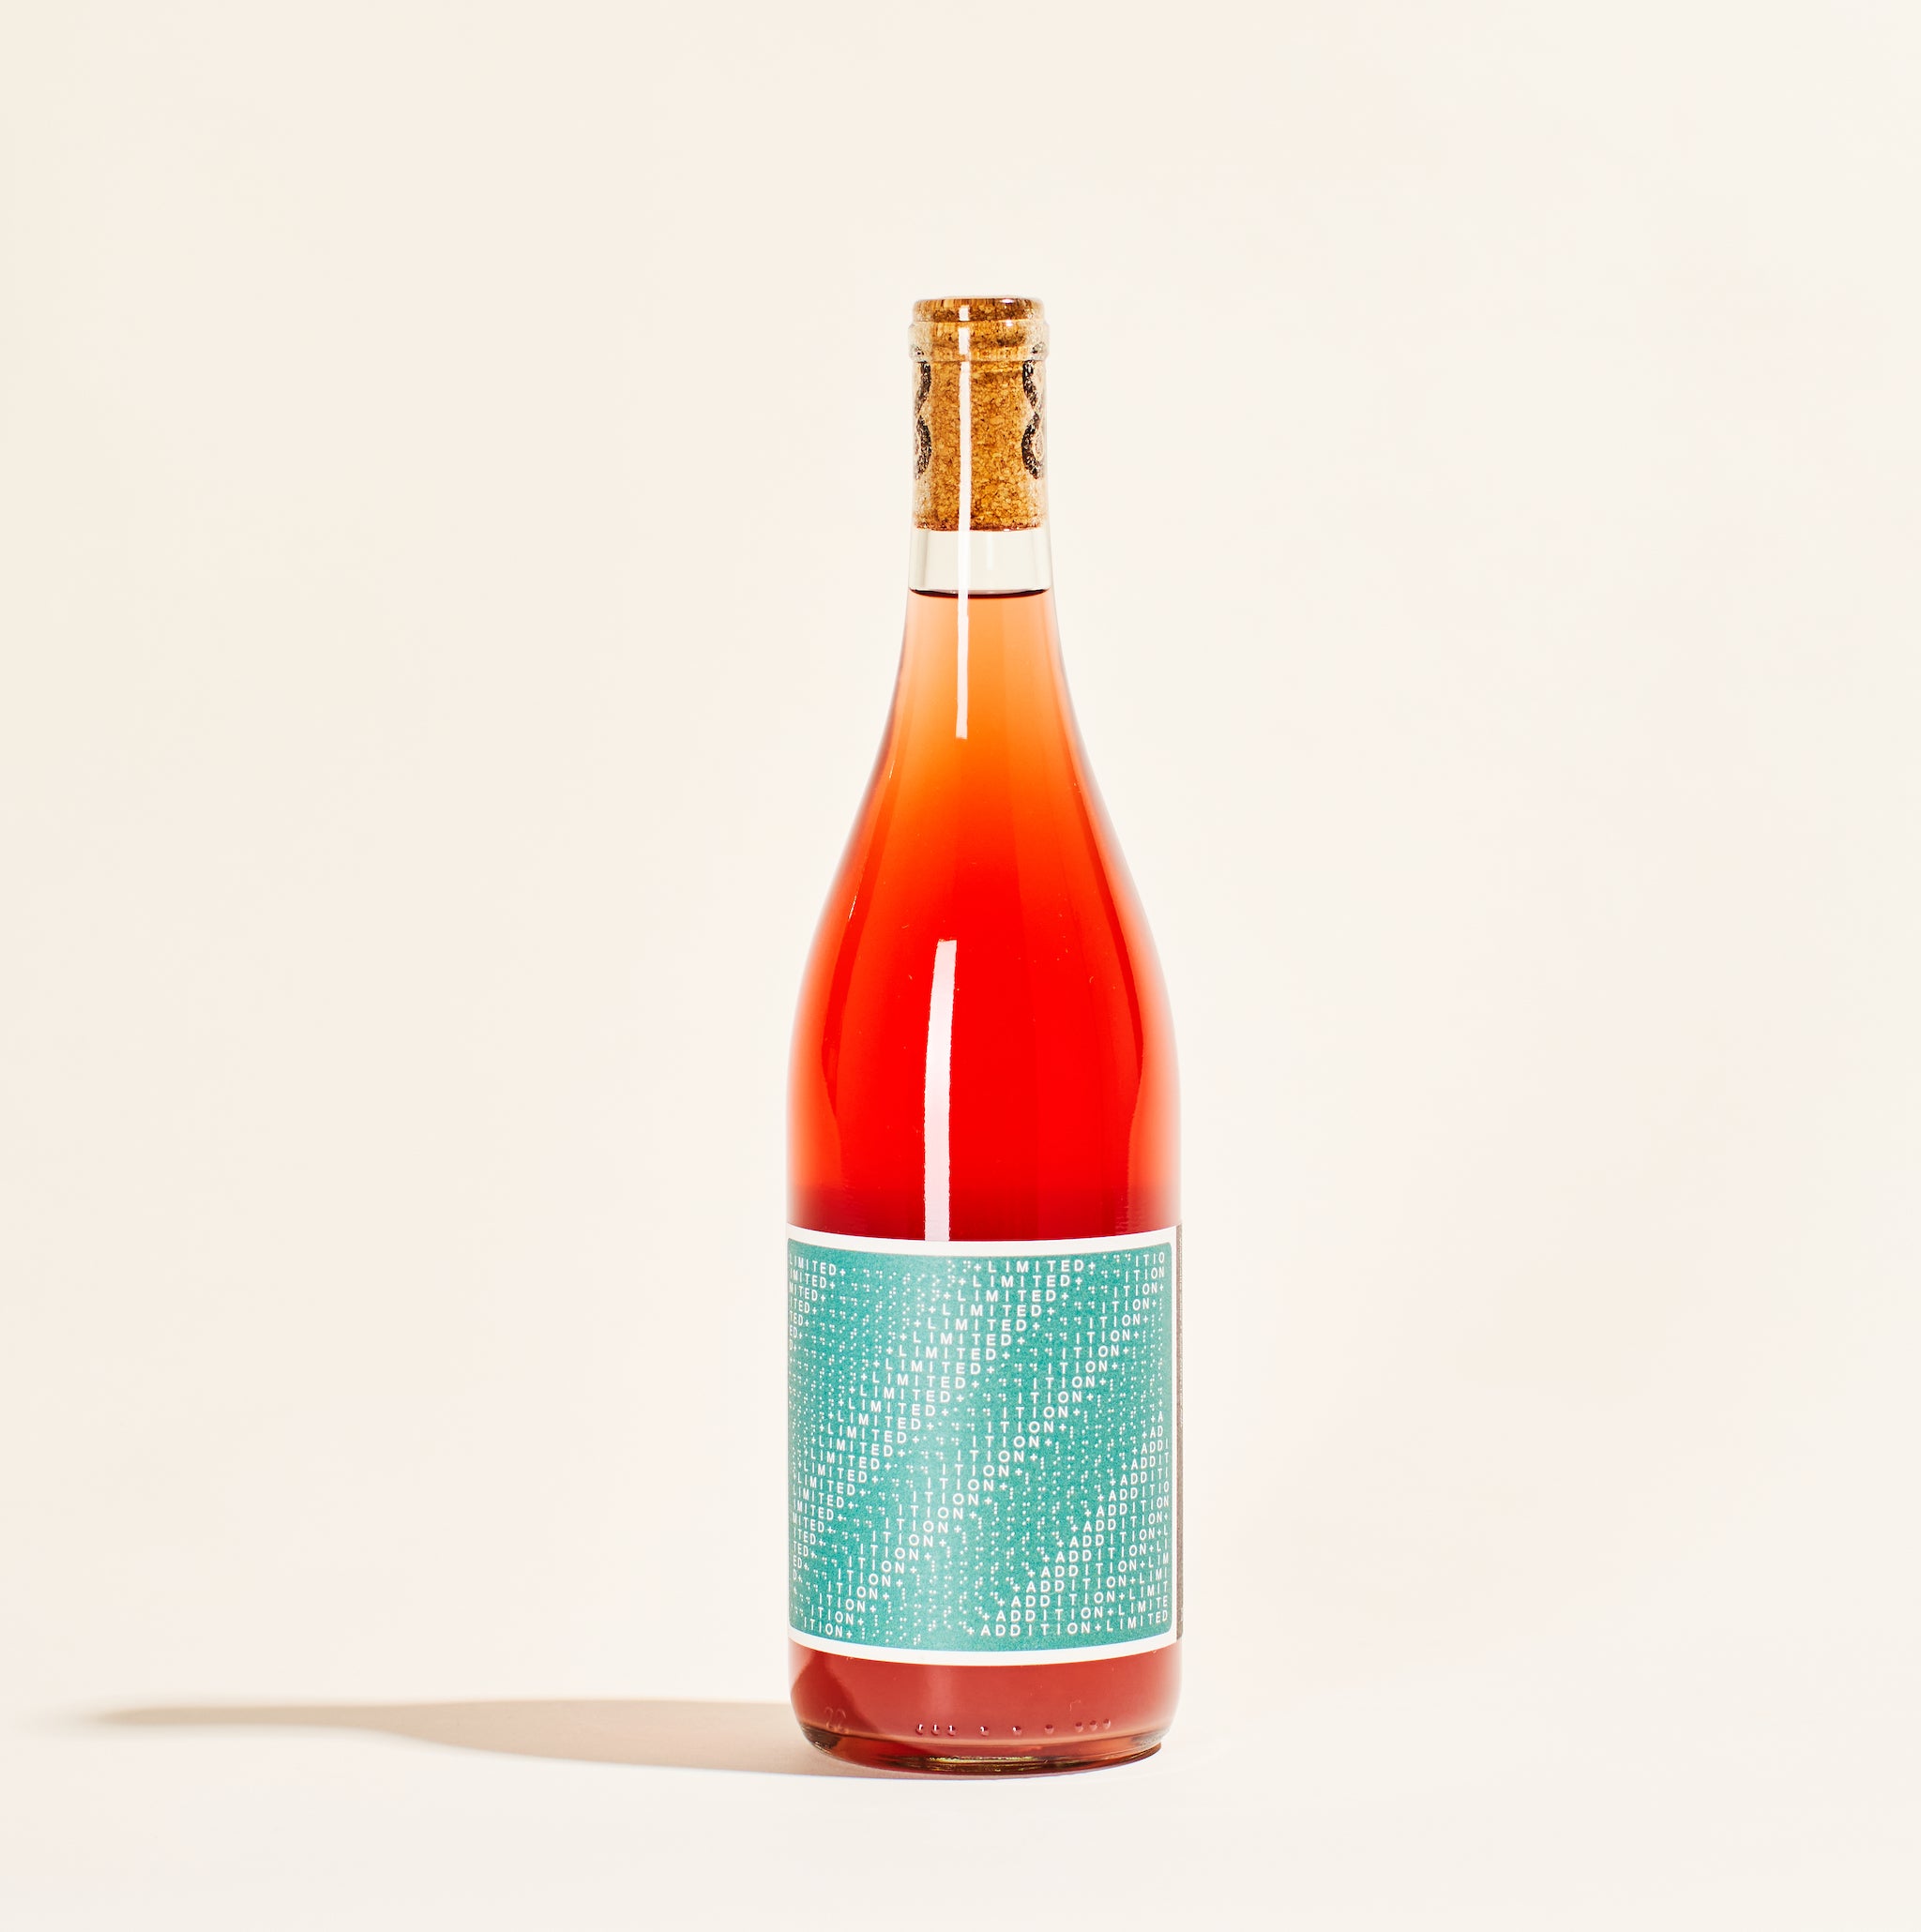 grenache rose by constant crush natural rose wine from oregon united states